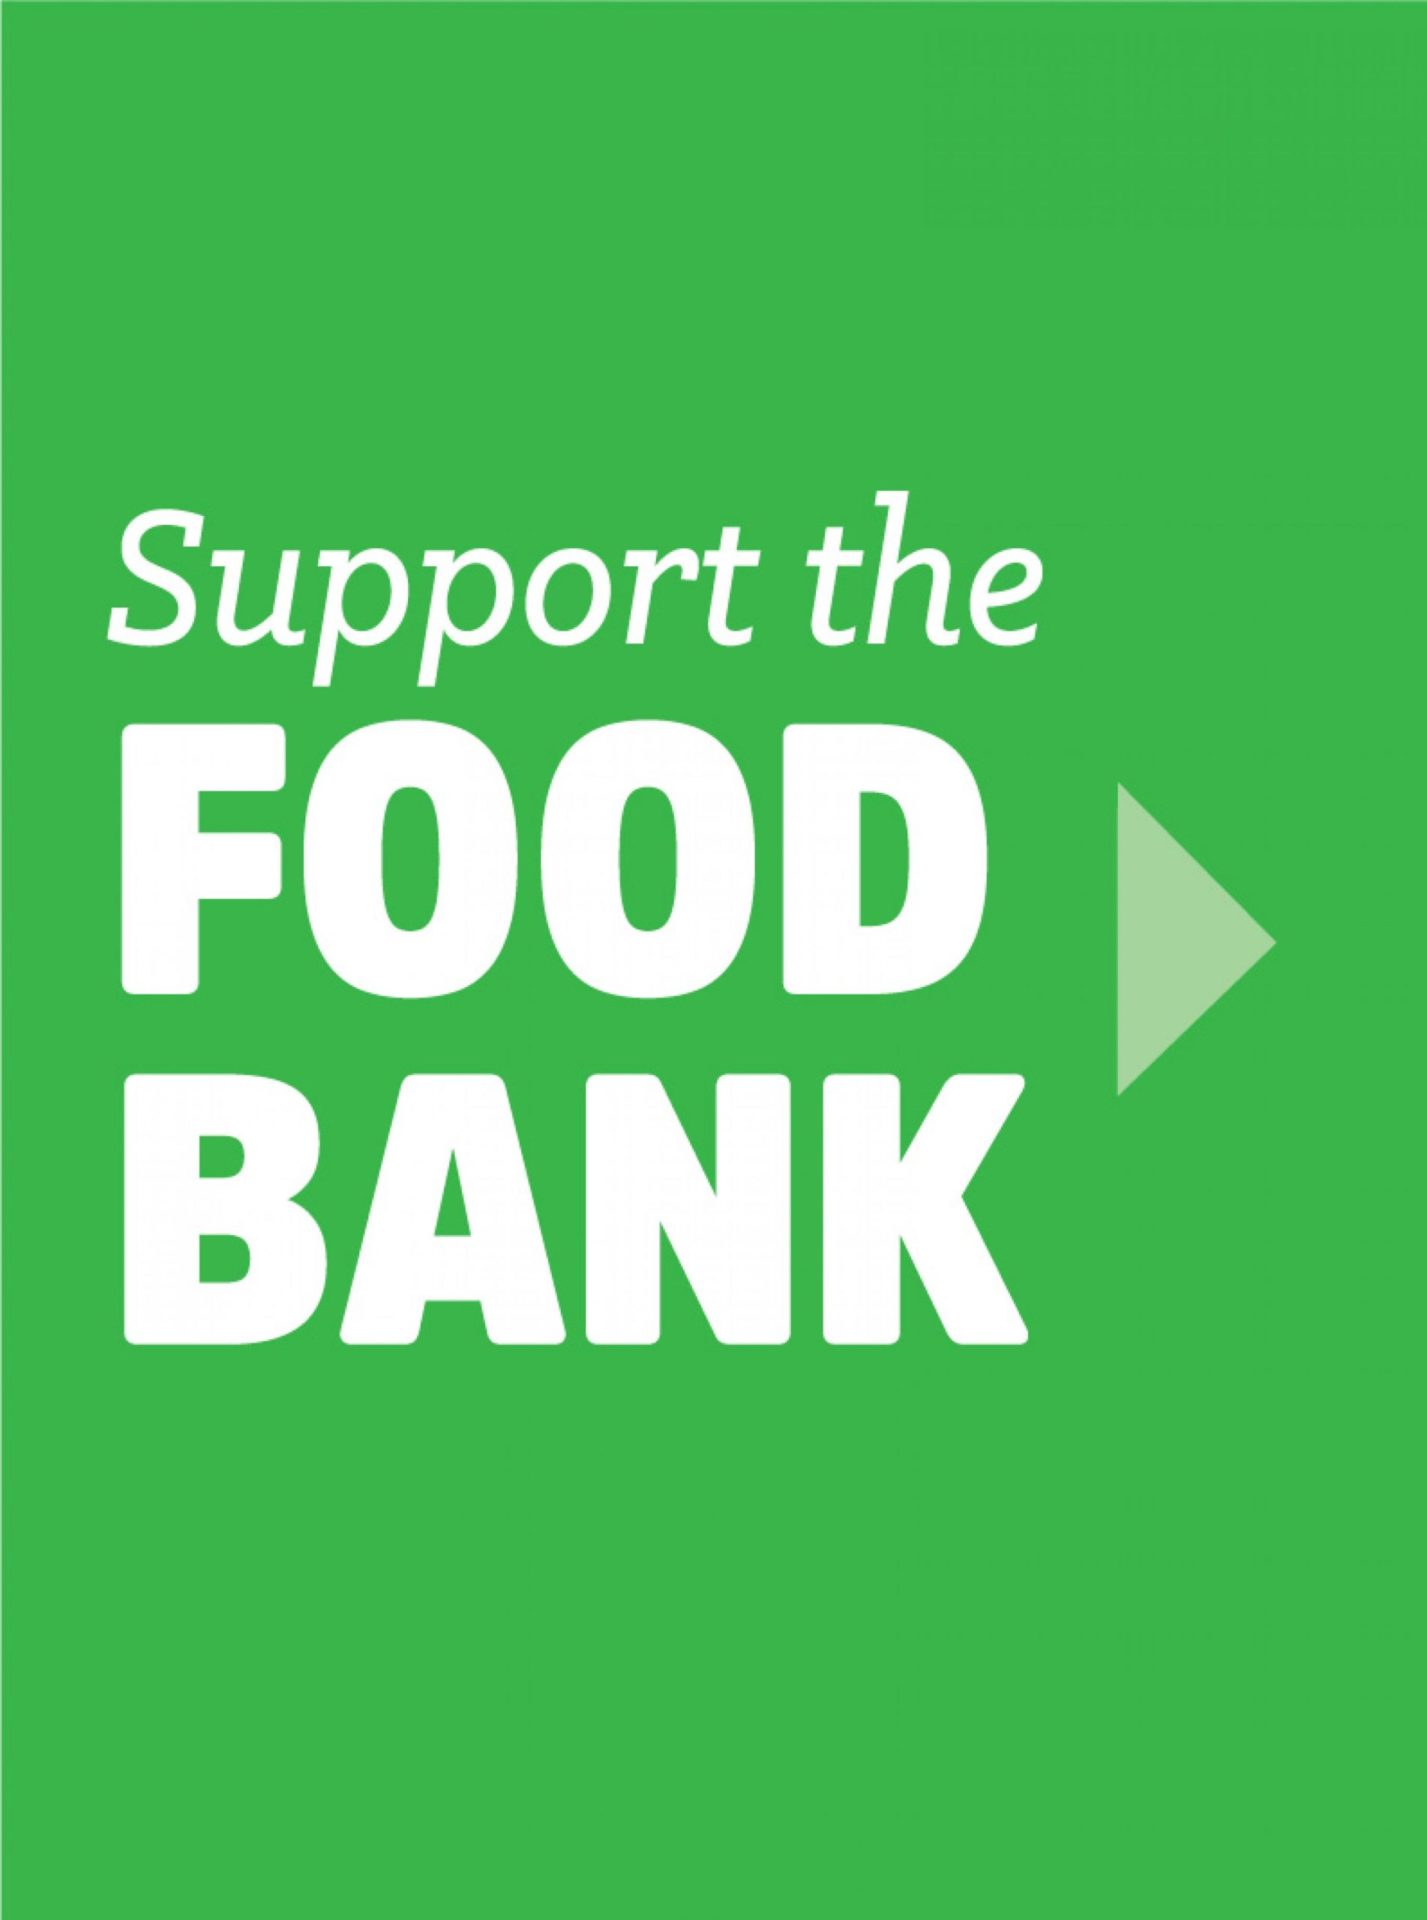 Support the FOOD BANK